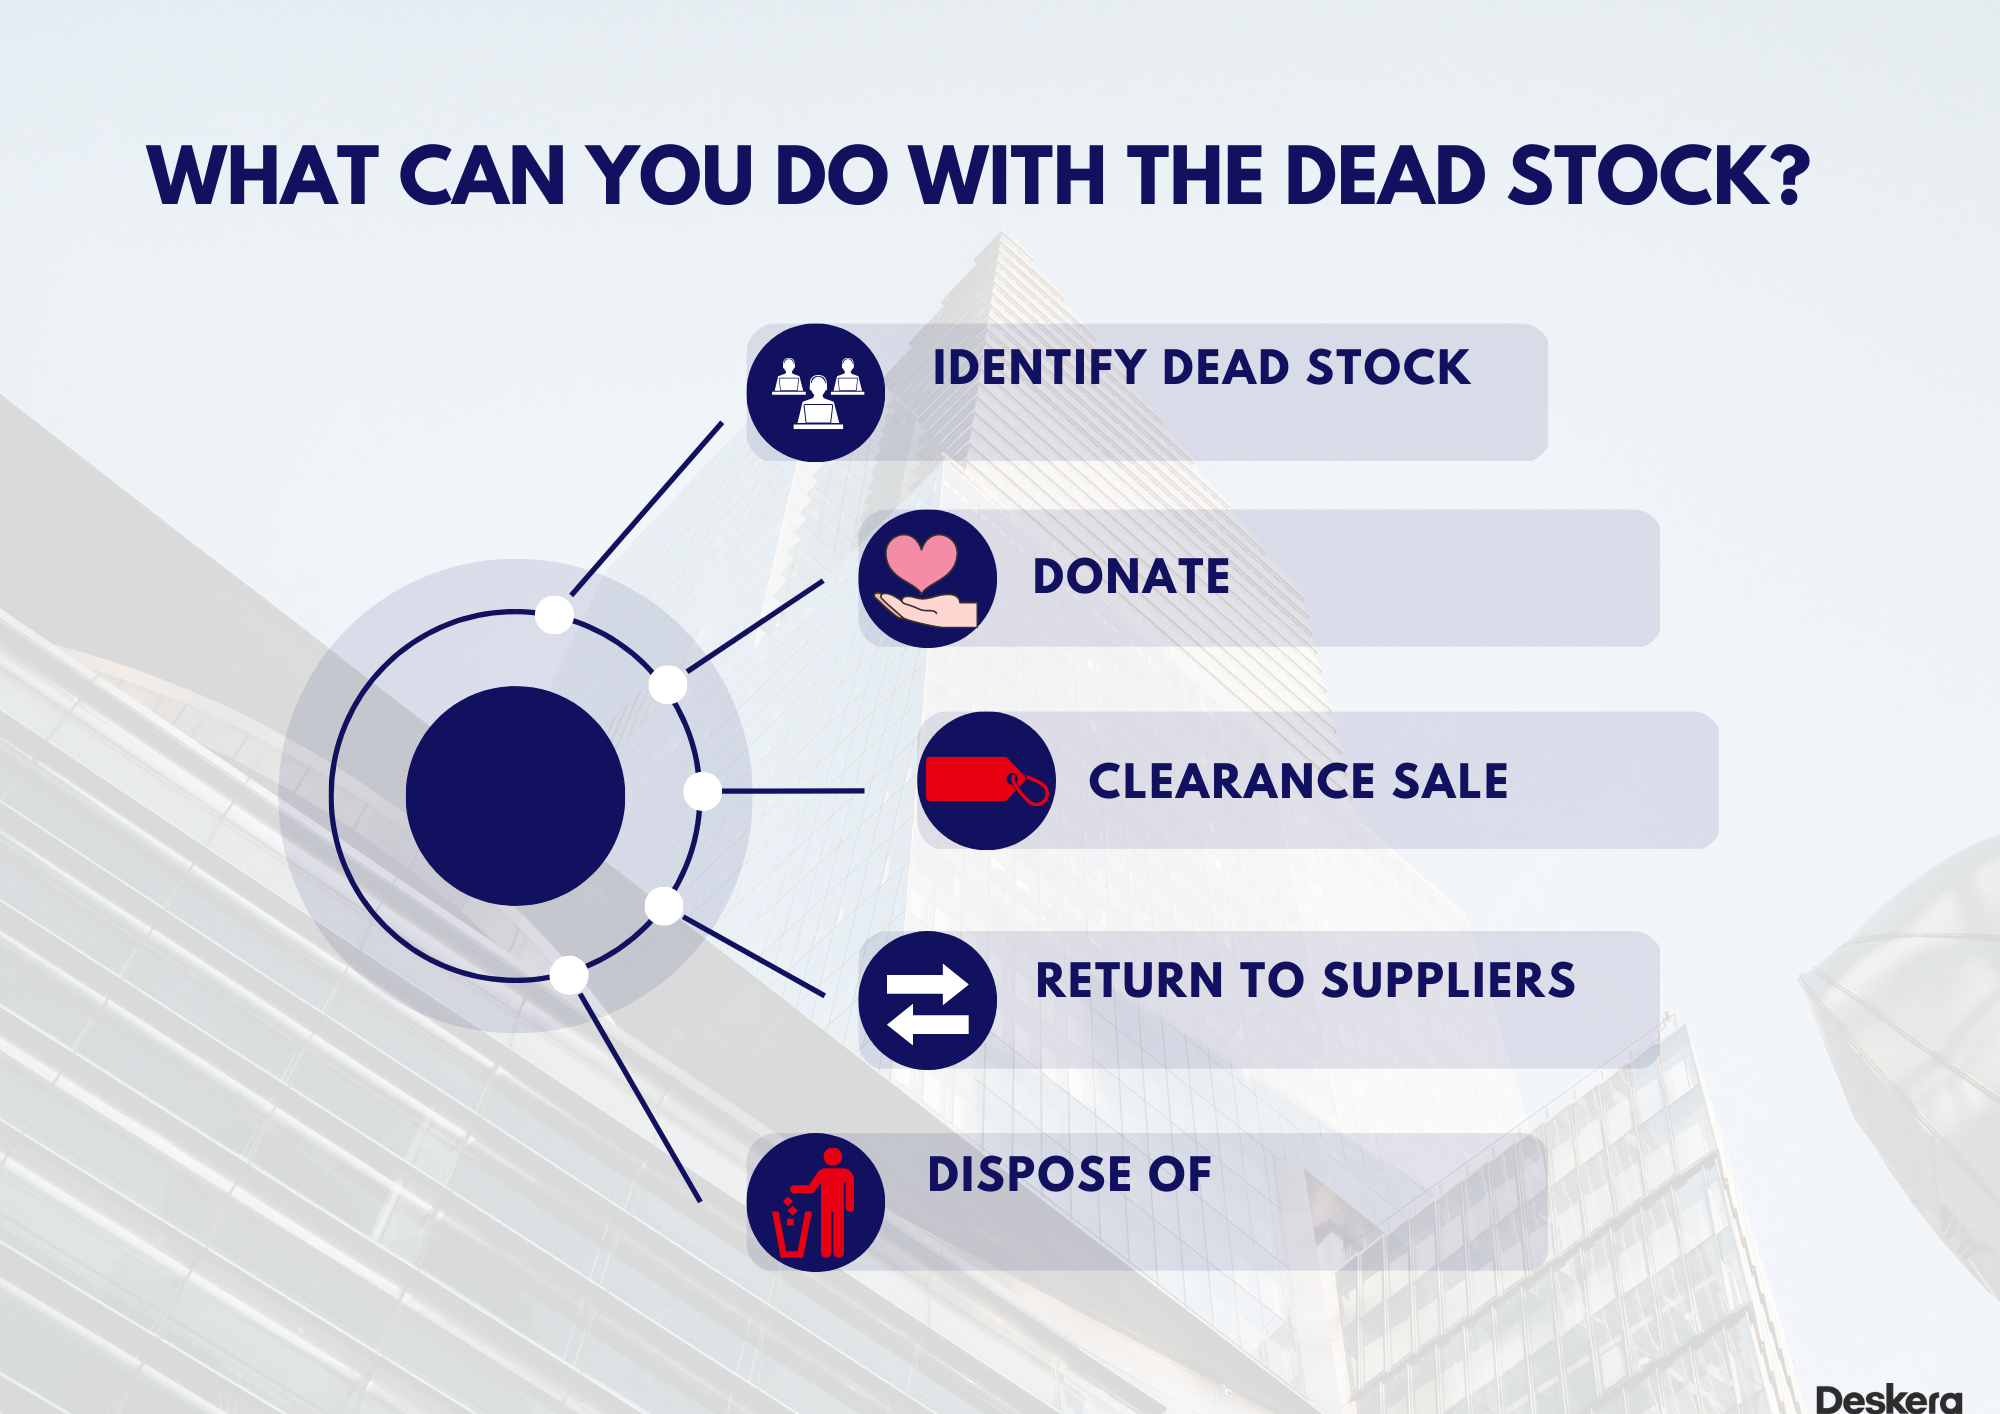 Your options in case you face dead stock